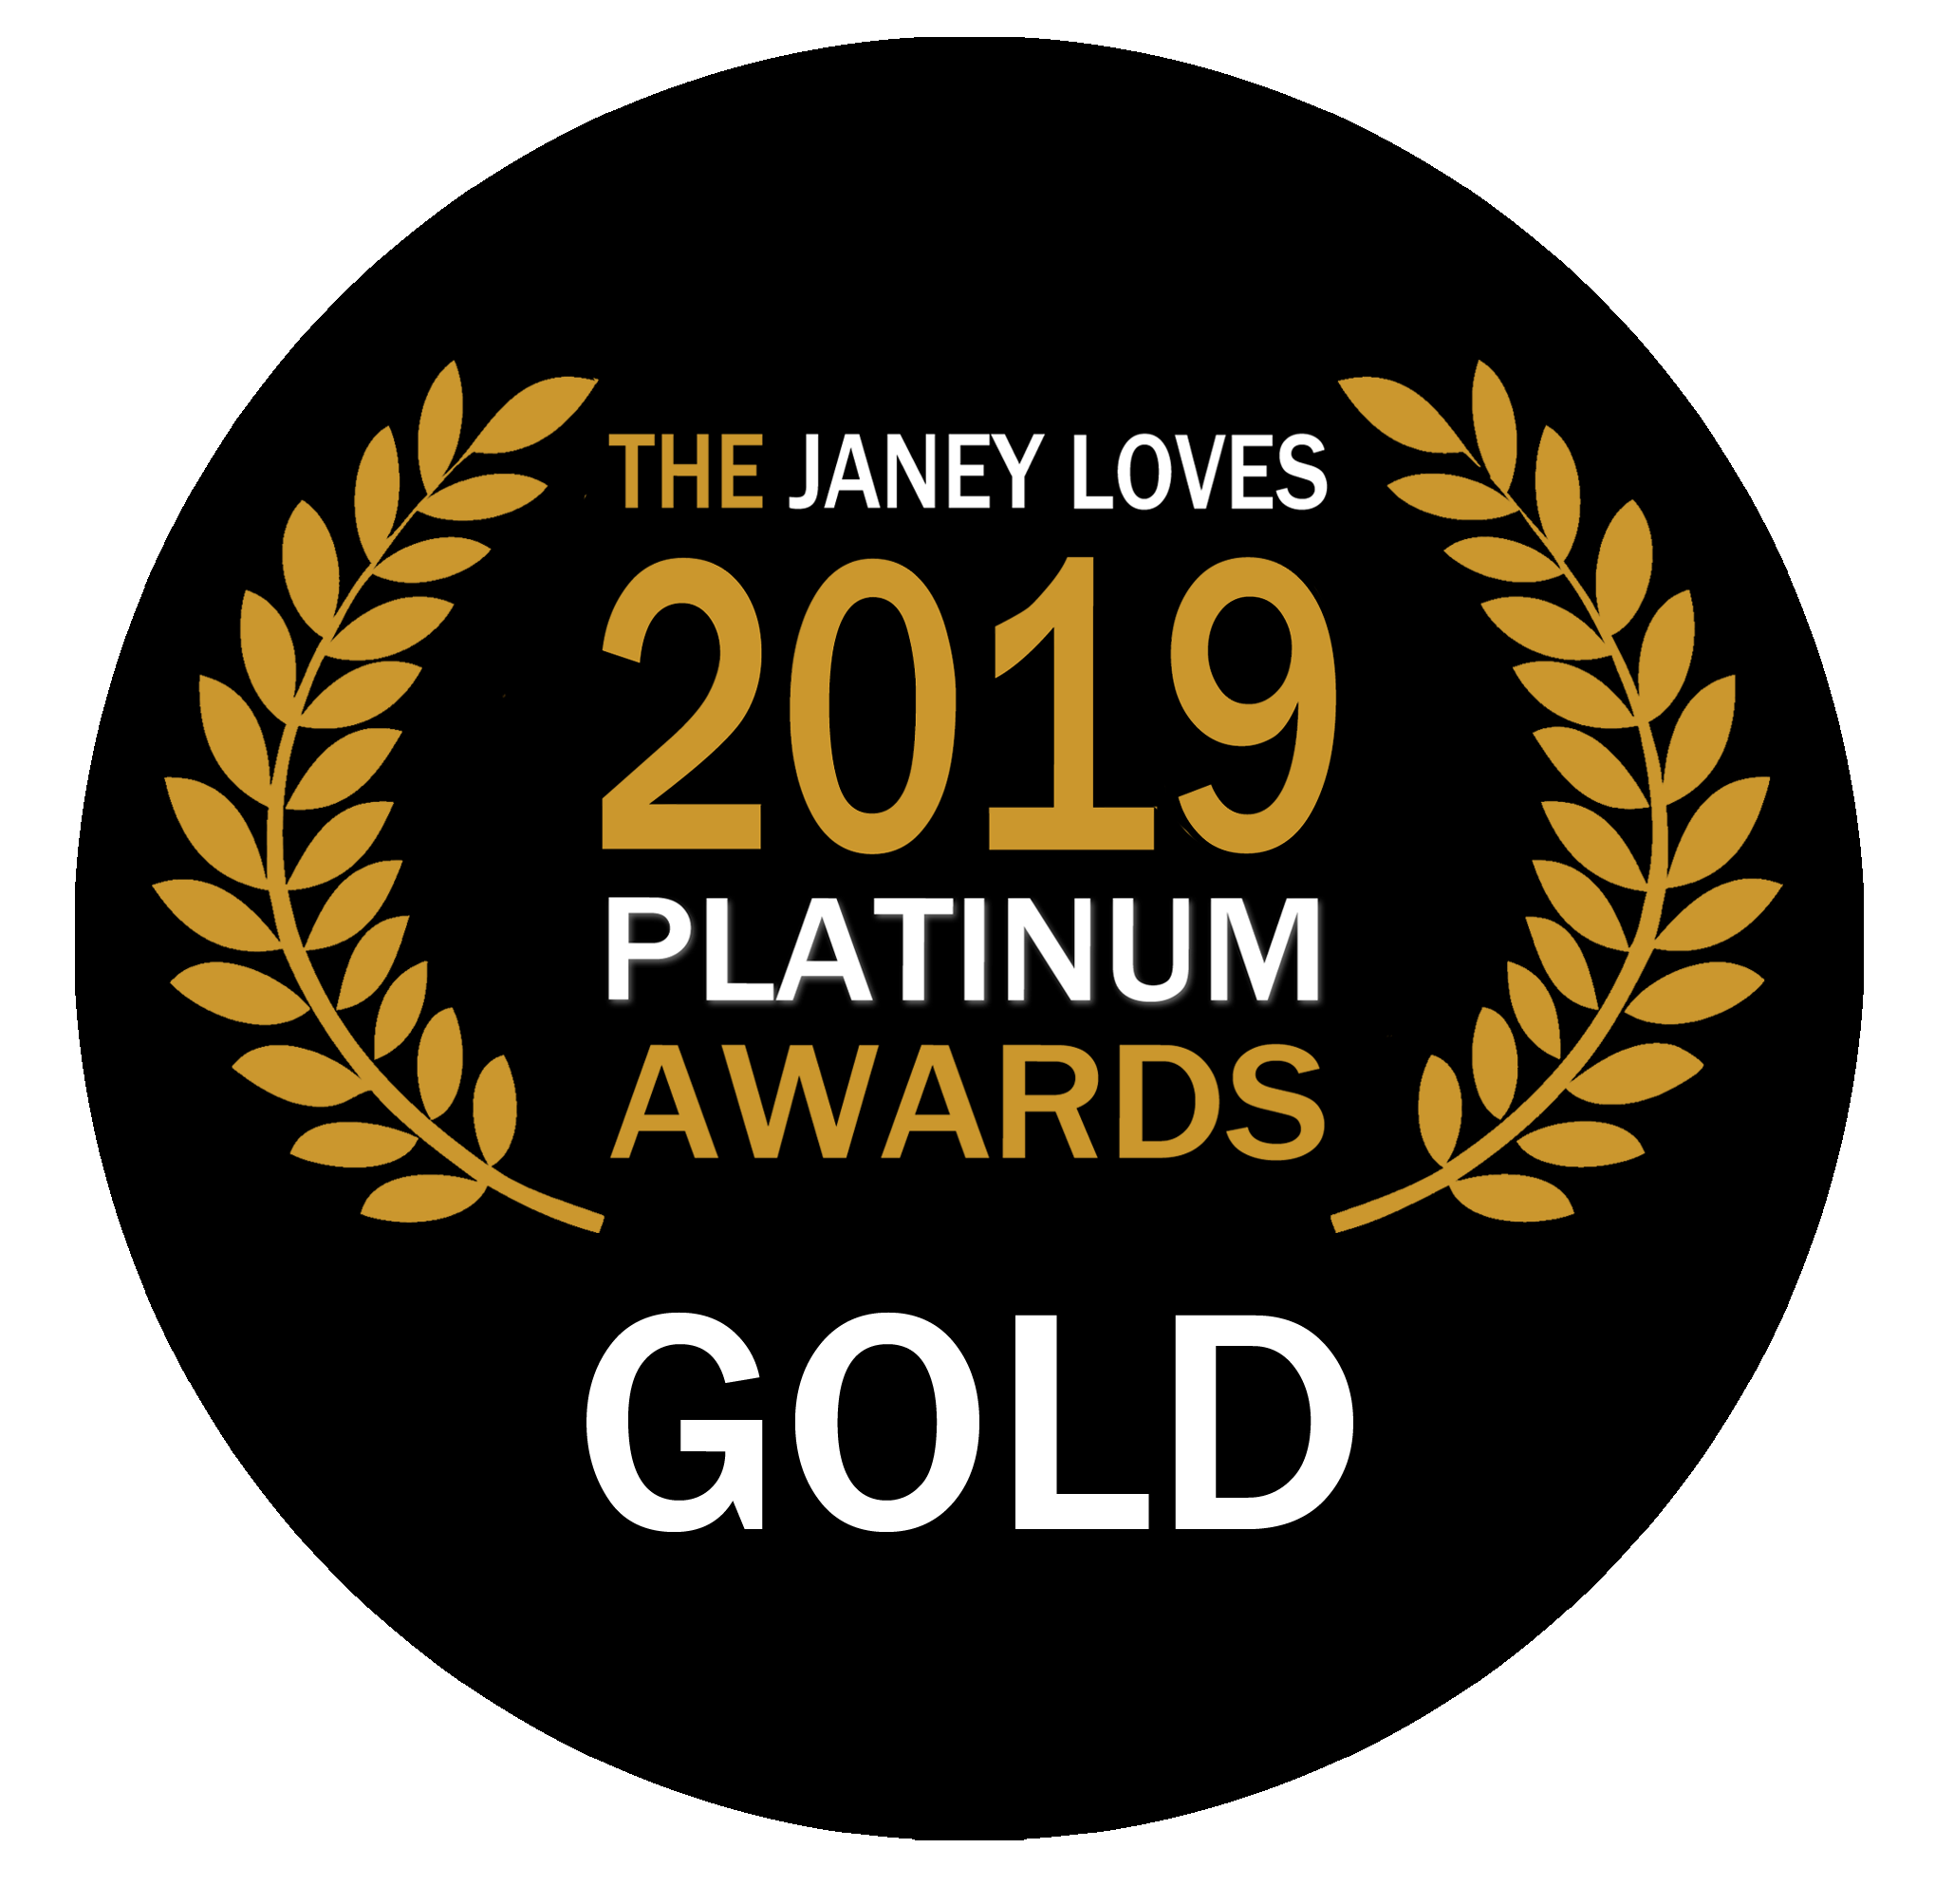 The Janey Loves 2019 Platinum Awards Gold Badge celebrates the exquisite quality of Bulgarian rose from the enchanting Alteya rose fields.